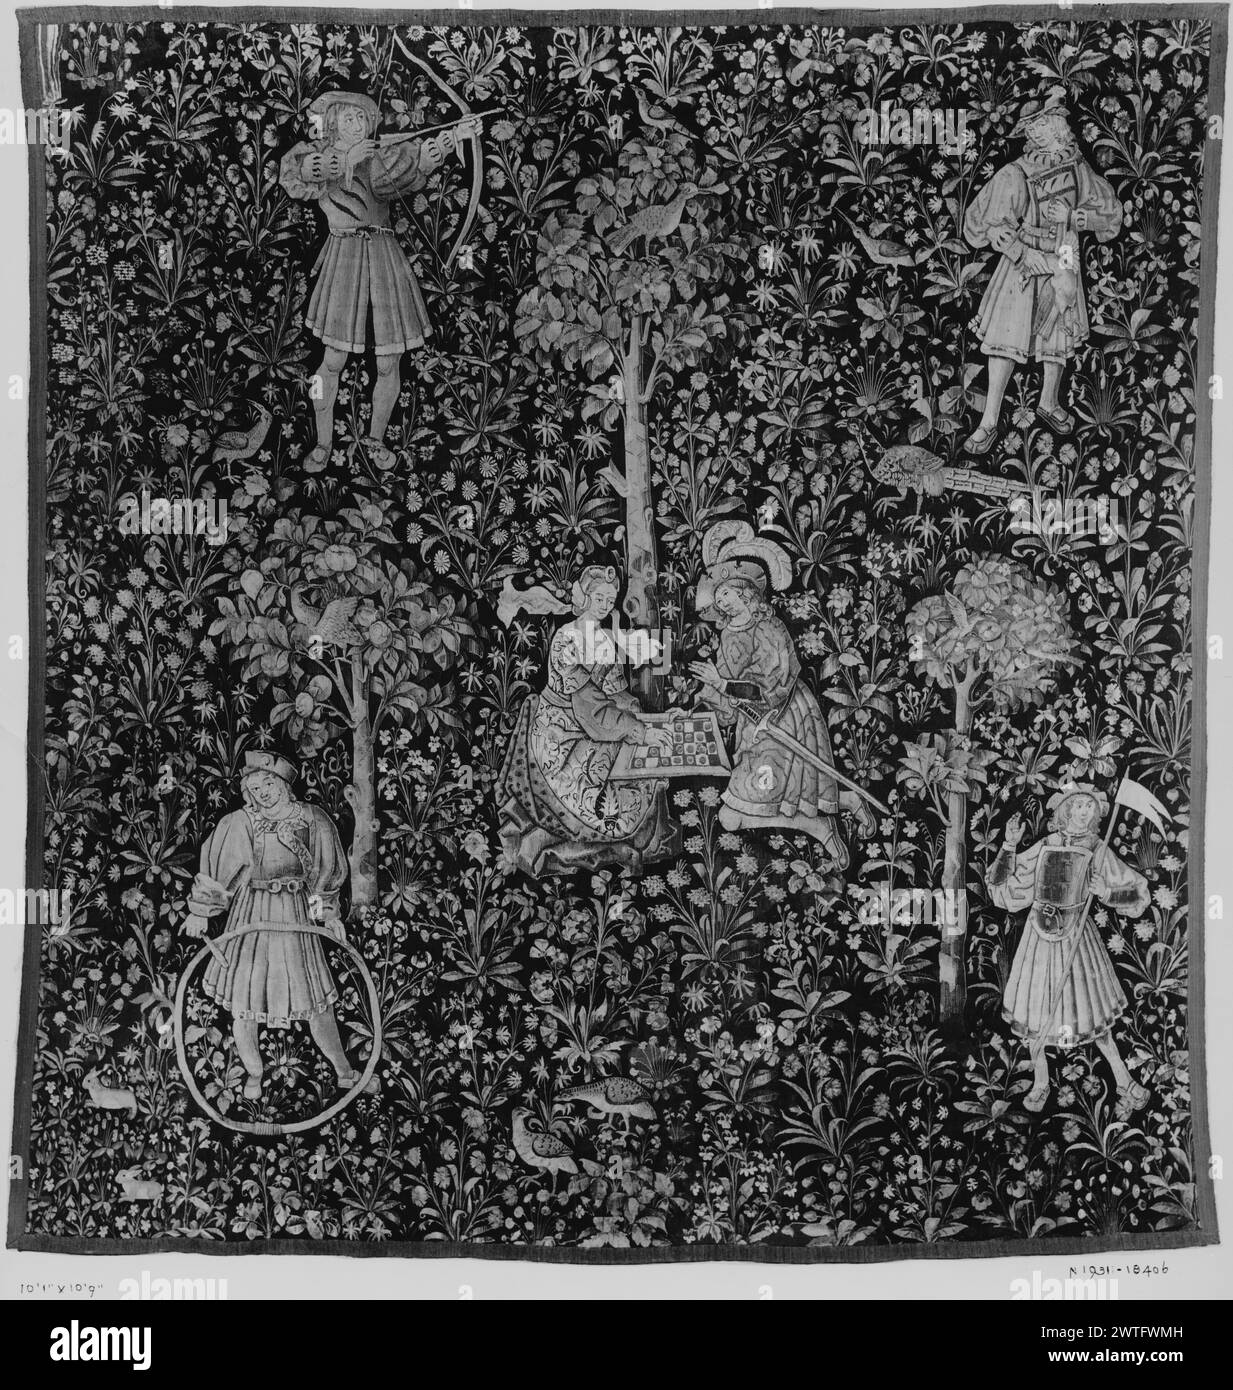 Millefleurs ground with couple playing chess. unknown c. 1500-1525 Tapestry Dimensions: H 10'9' x W 10'1' Tapestry Materials/Techniques: wool & silk Culture: Southern Netherlands Ownership History: Mme. Camille Lelong [Laurentine-Françoise Bernage] coll. French & Co. purchased from Edson Bradley, invoiced 4/29/1935; sold 1/31/1936 to Mrs. Grace R. Rogers [SS 18406]. French & Co. purchased from Parke-Bernet Galleries (Grace Rainey Rogers sale) 11/18/1943; sold to Geo [George?] Booth 7/24/1944 [SS 76714]. Cranbrook Academy of Art/Museum, Bloomfield, Michigan; sold at Sotheby's Parke-Bernet (New Stock Photo